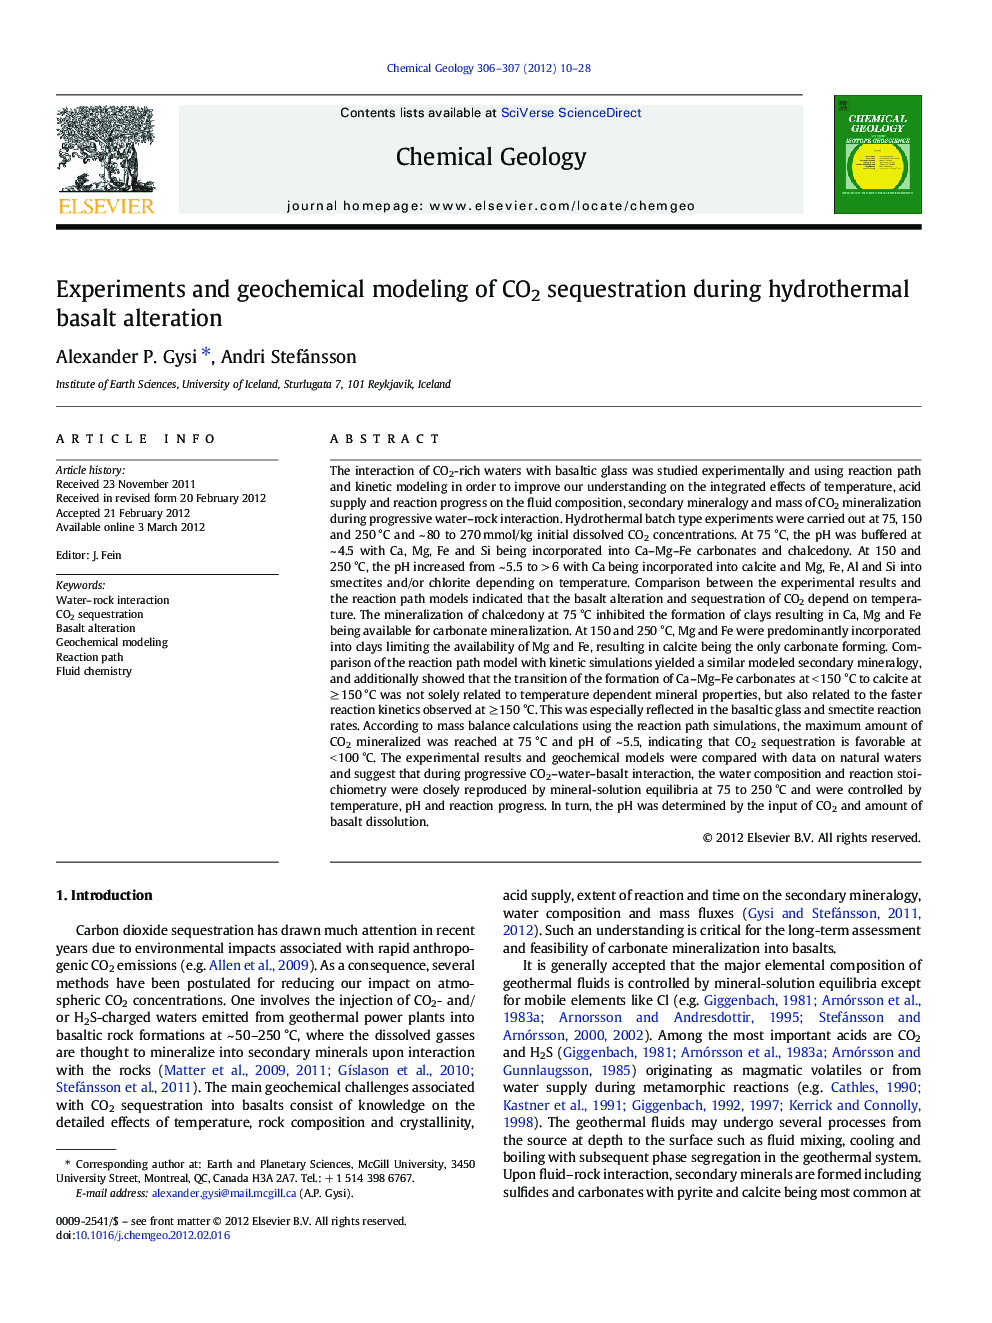 Experiments and geochemical modeling of CO2 sequestration during hydrothermal basalt alteration